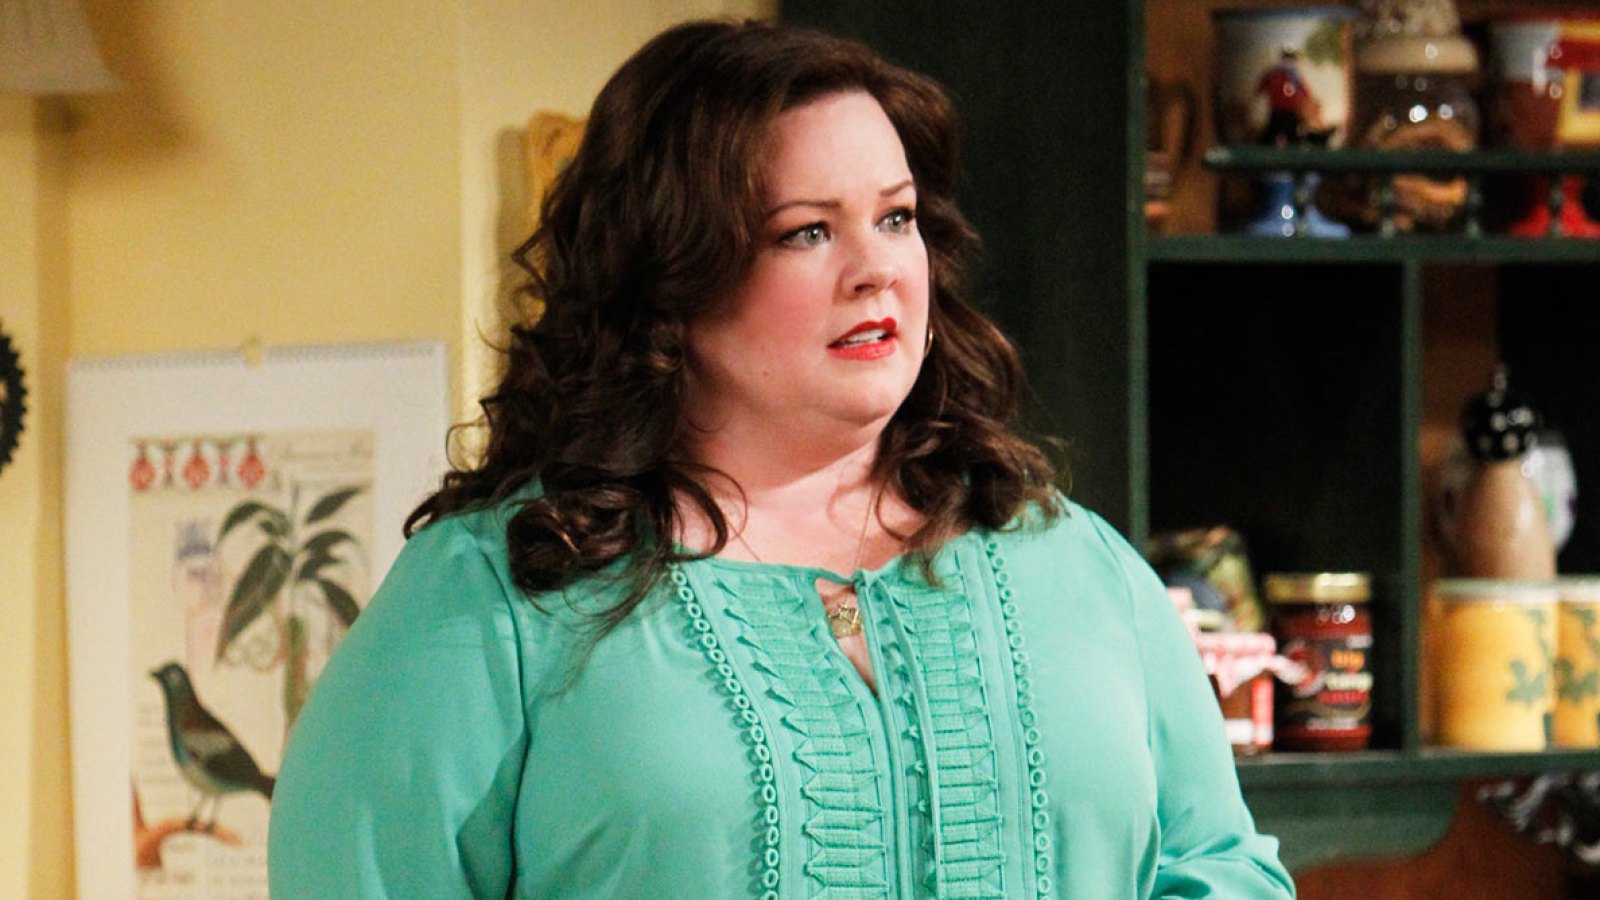 Mike & Molly Wallpapers